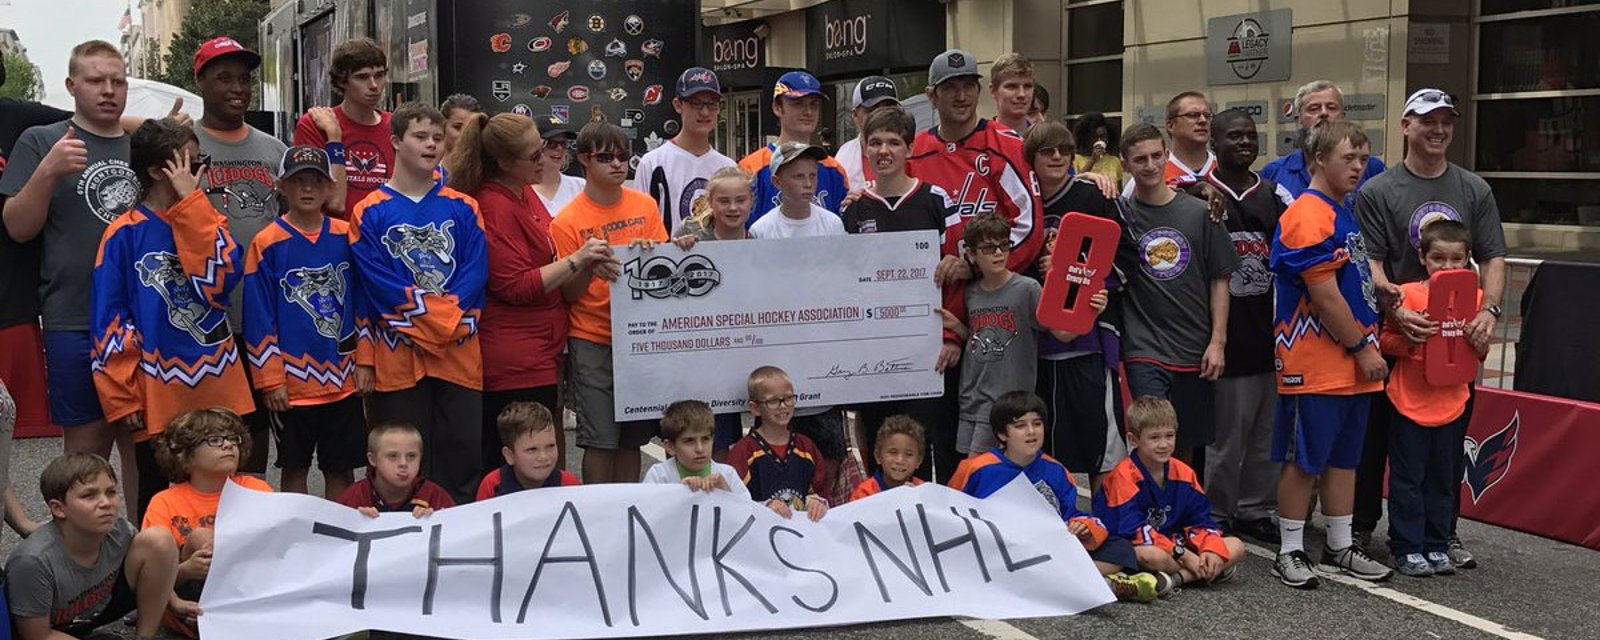 Must see: Ovechkin surprises kids in street hockey game!